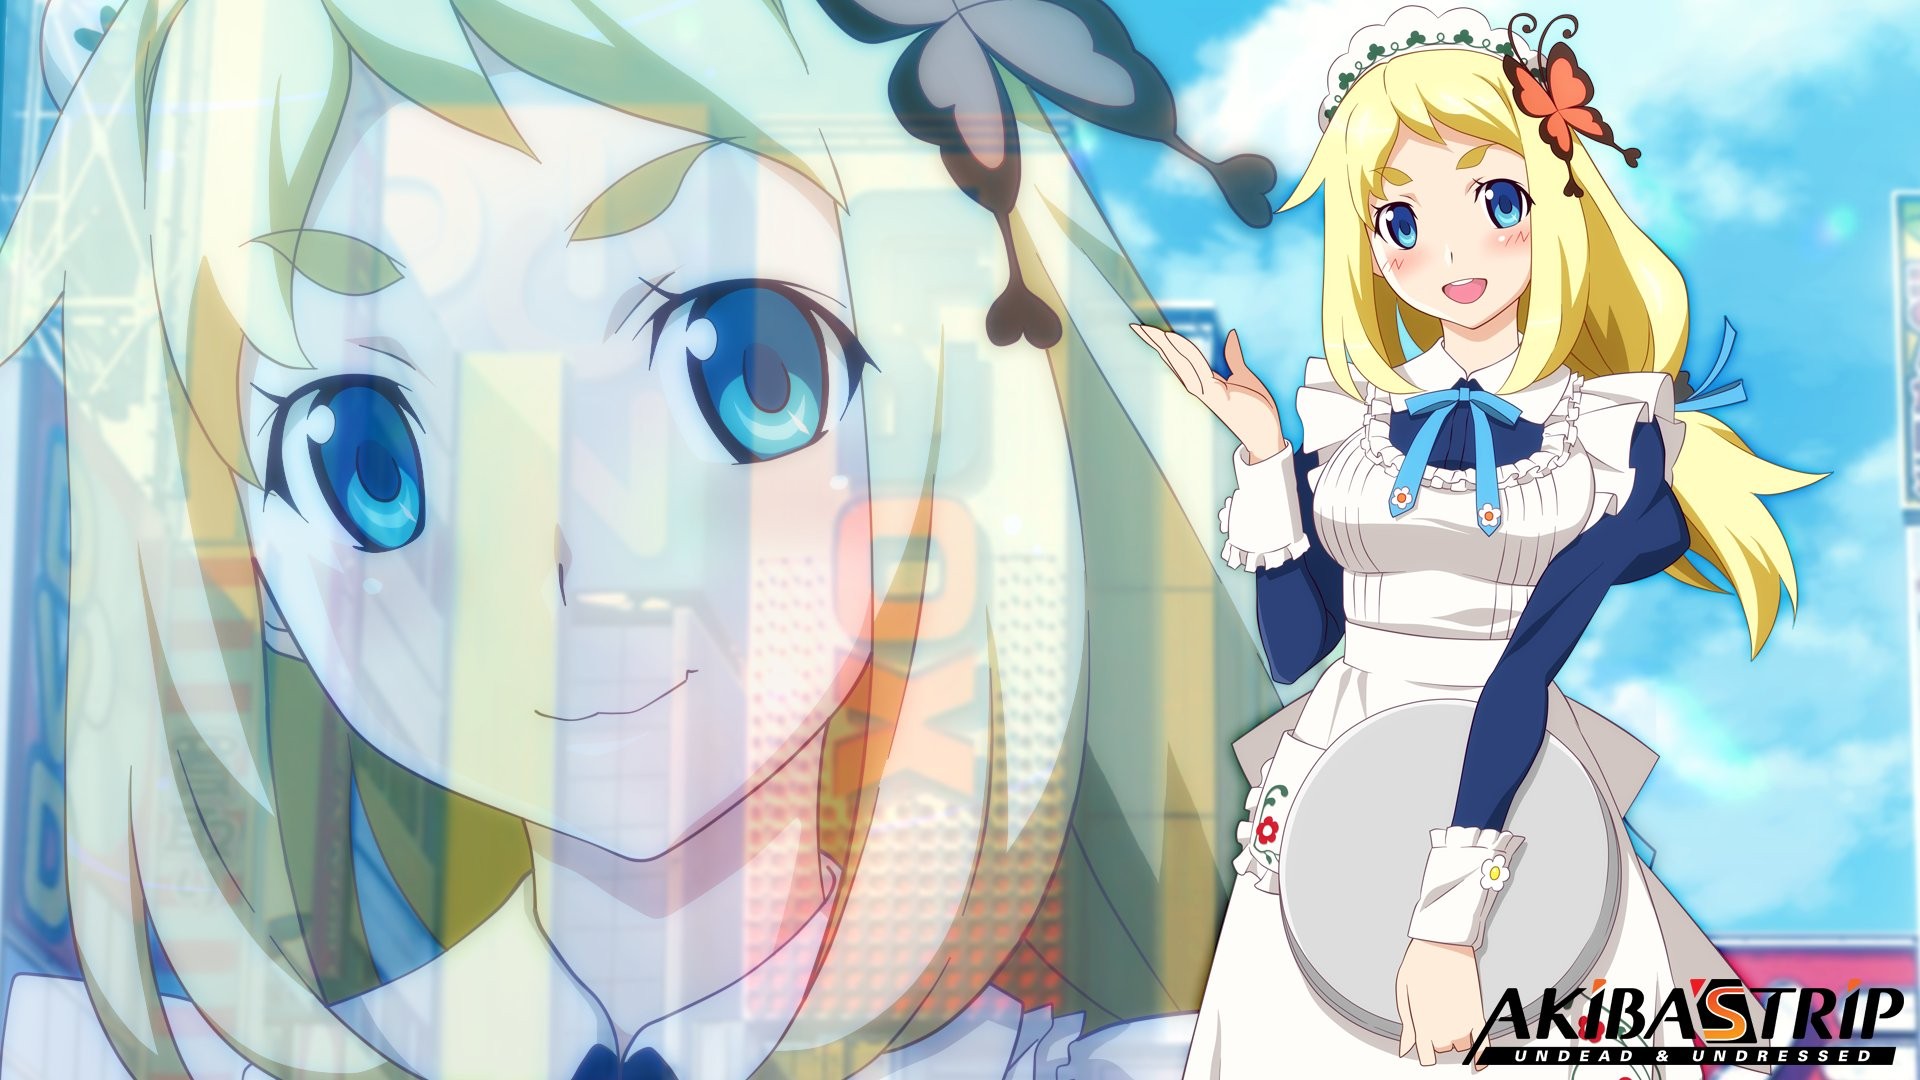 Akibas Trip Video Games Anime Maid Outfit Smiling Blonde Blue Eyes 1920x1080